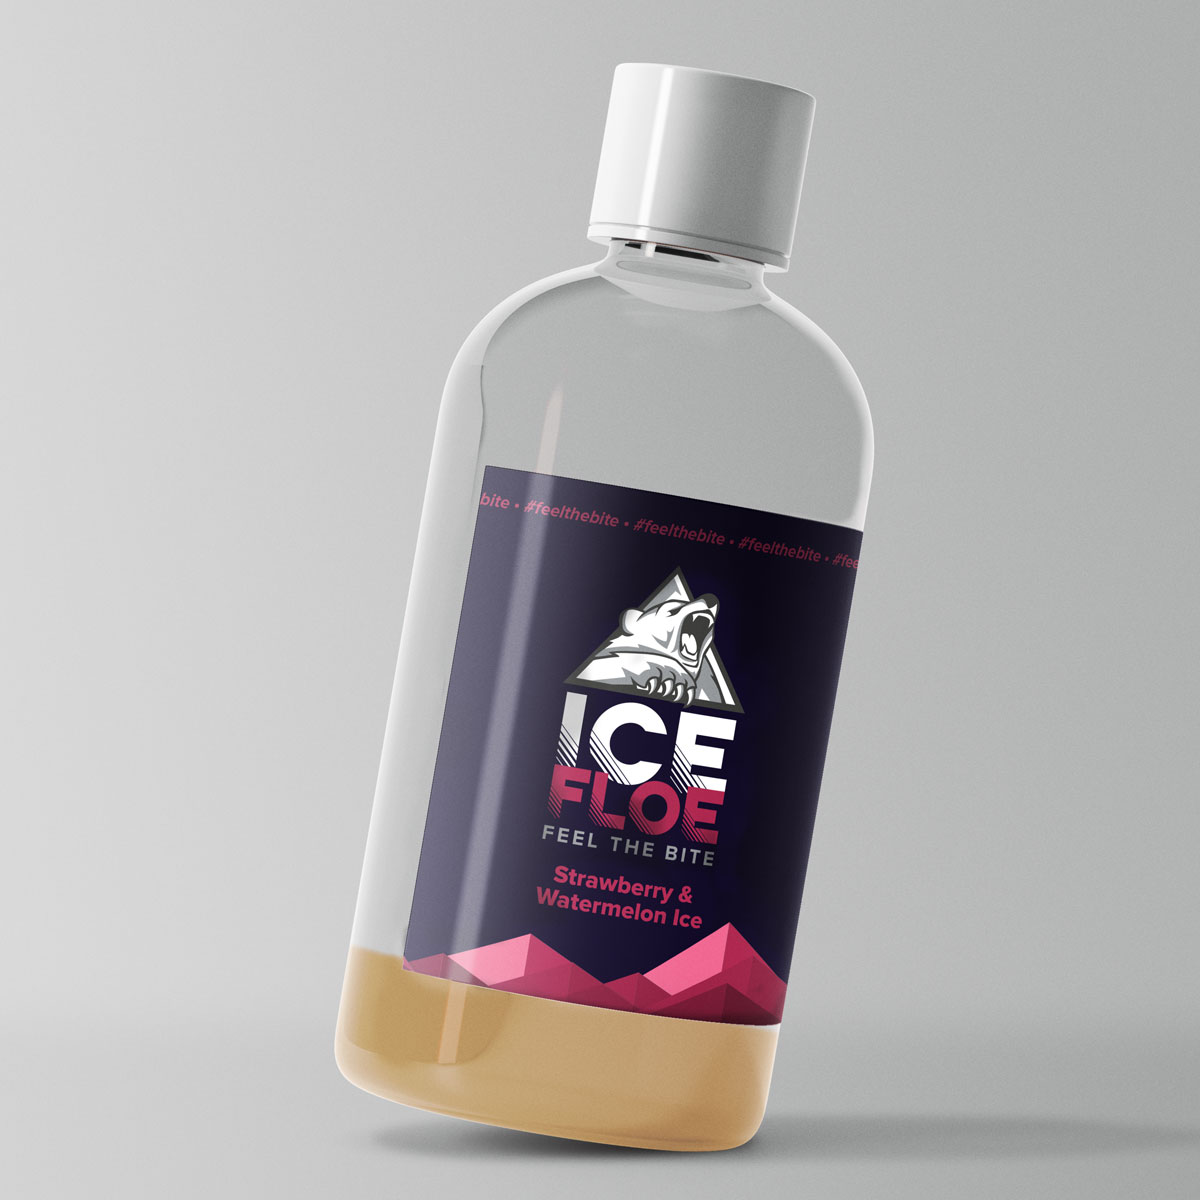 Strawberry & Watermelon Ice Flavour Shot by Ice Floe - 250ml